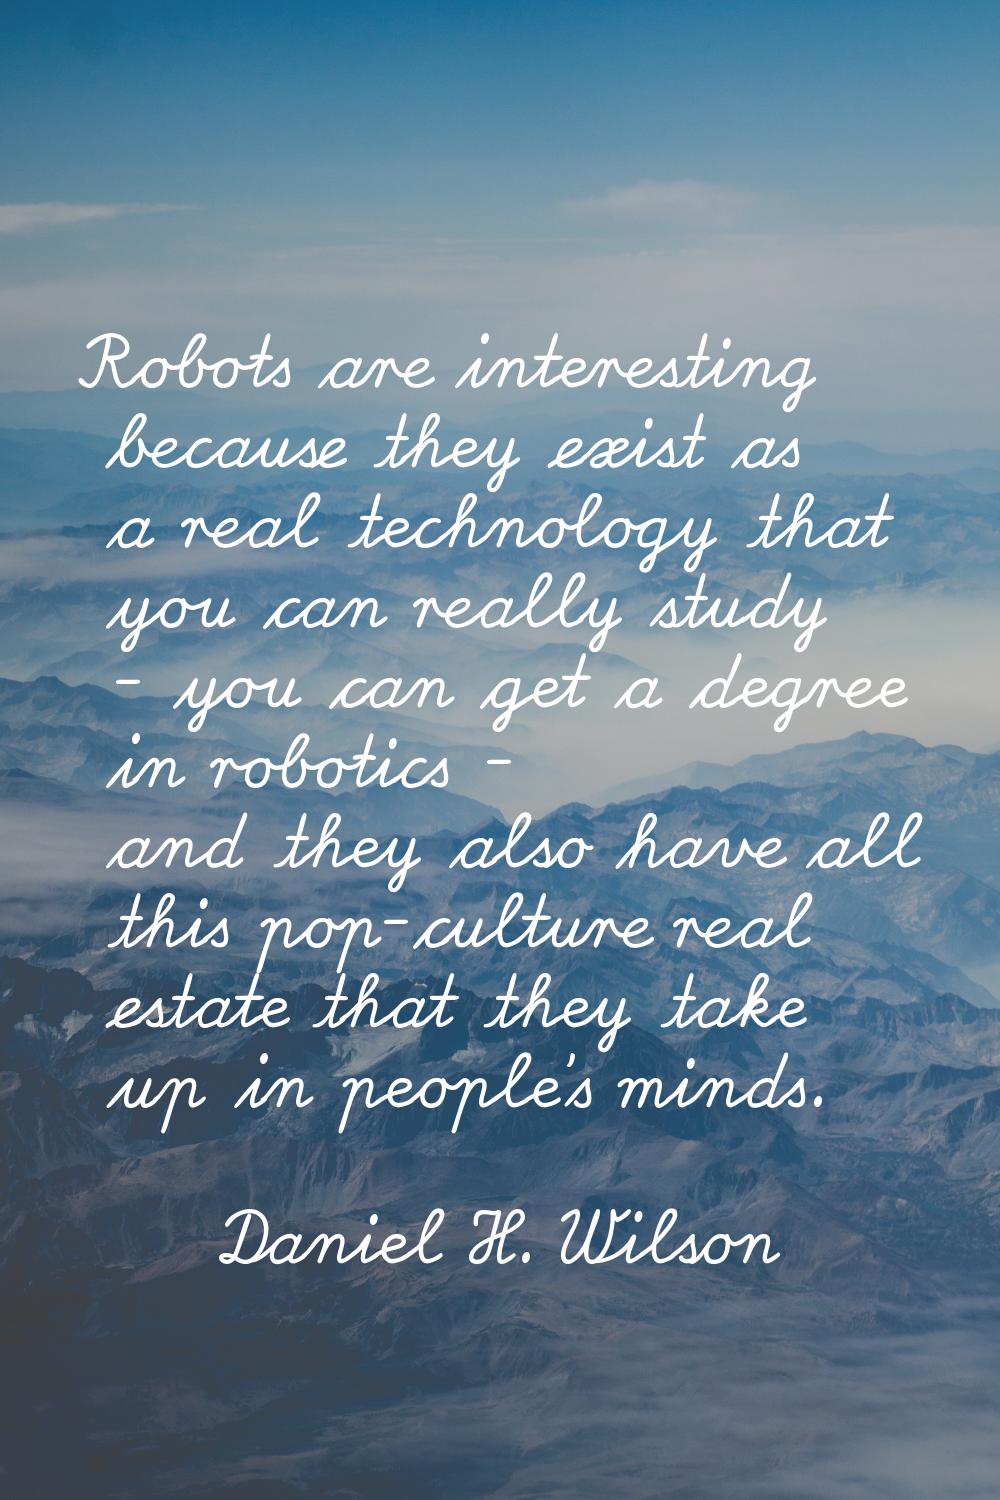 Robots are interesting because they exist as a real technology that you can really study - you can 